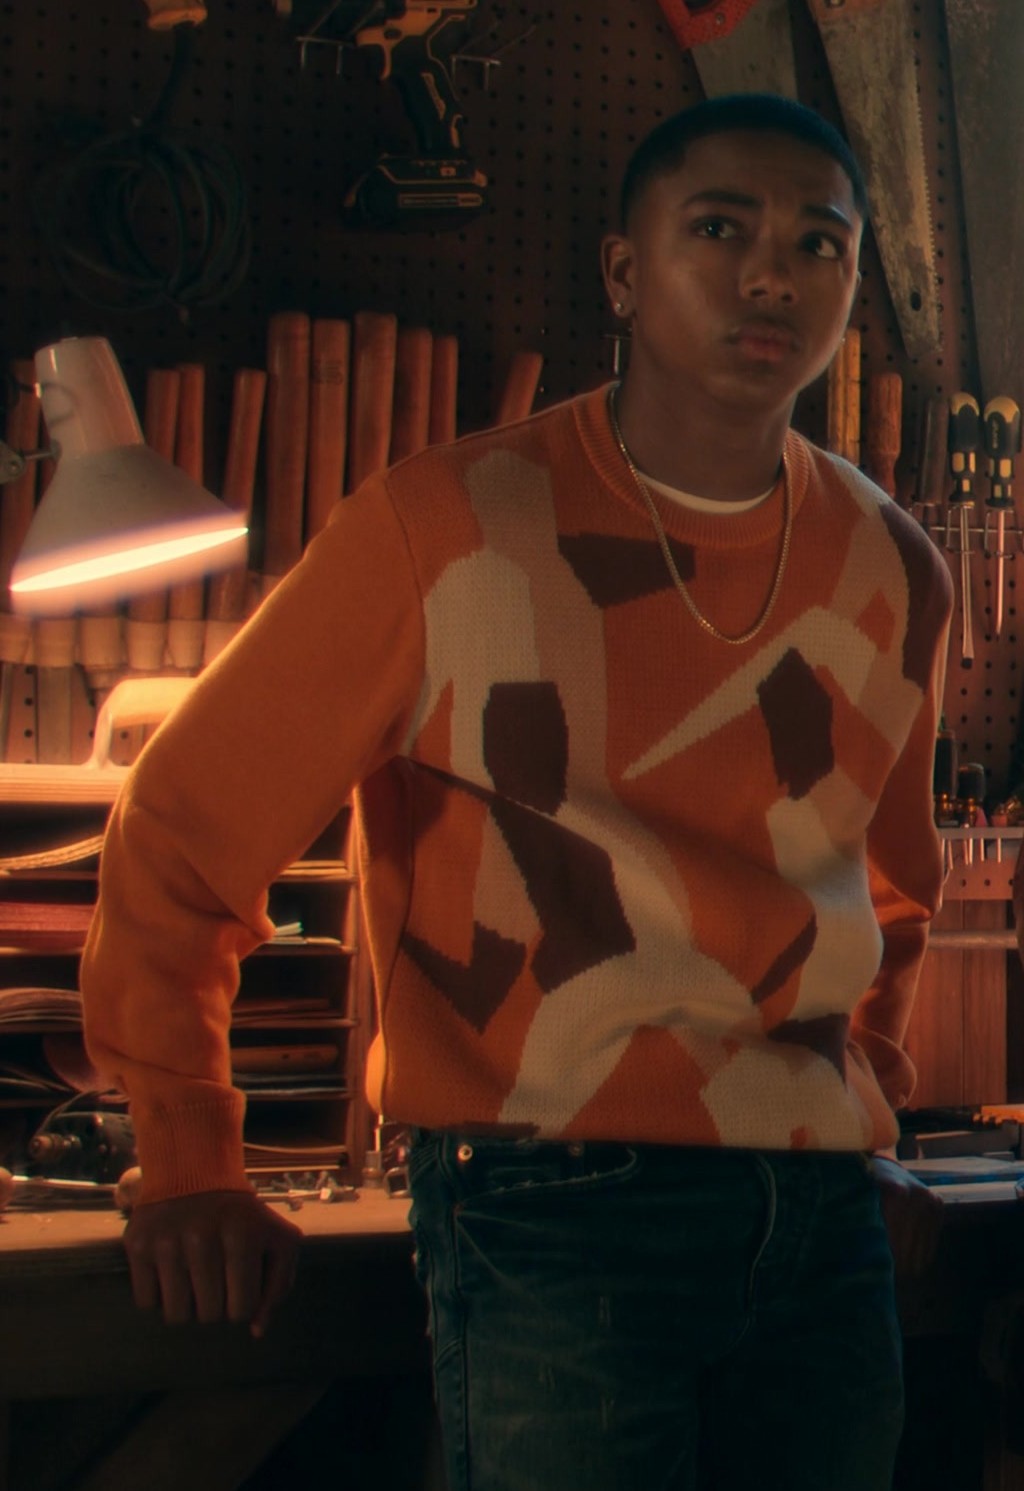 Worn on Candy Cane Lane (2023) Movie - Casual Burnt Orange and Beige Abstract Pattern Knit Jumper Worn by Thaddeus J. Mixson as Nick Carver